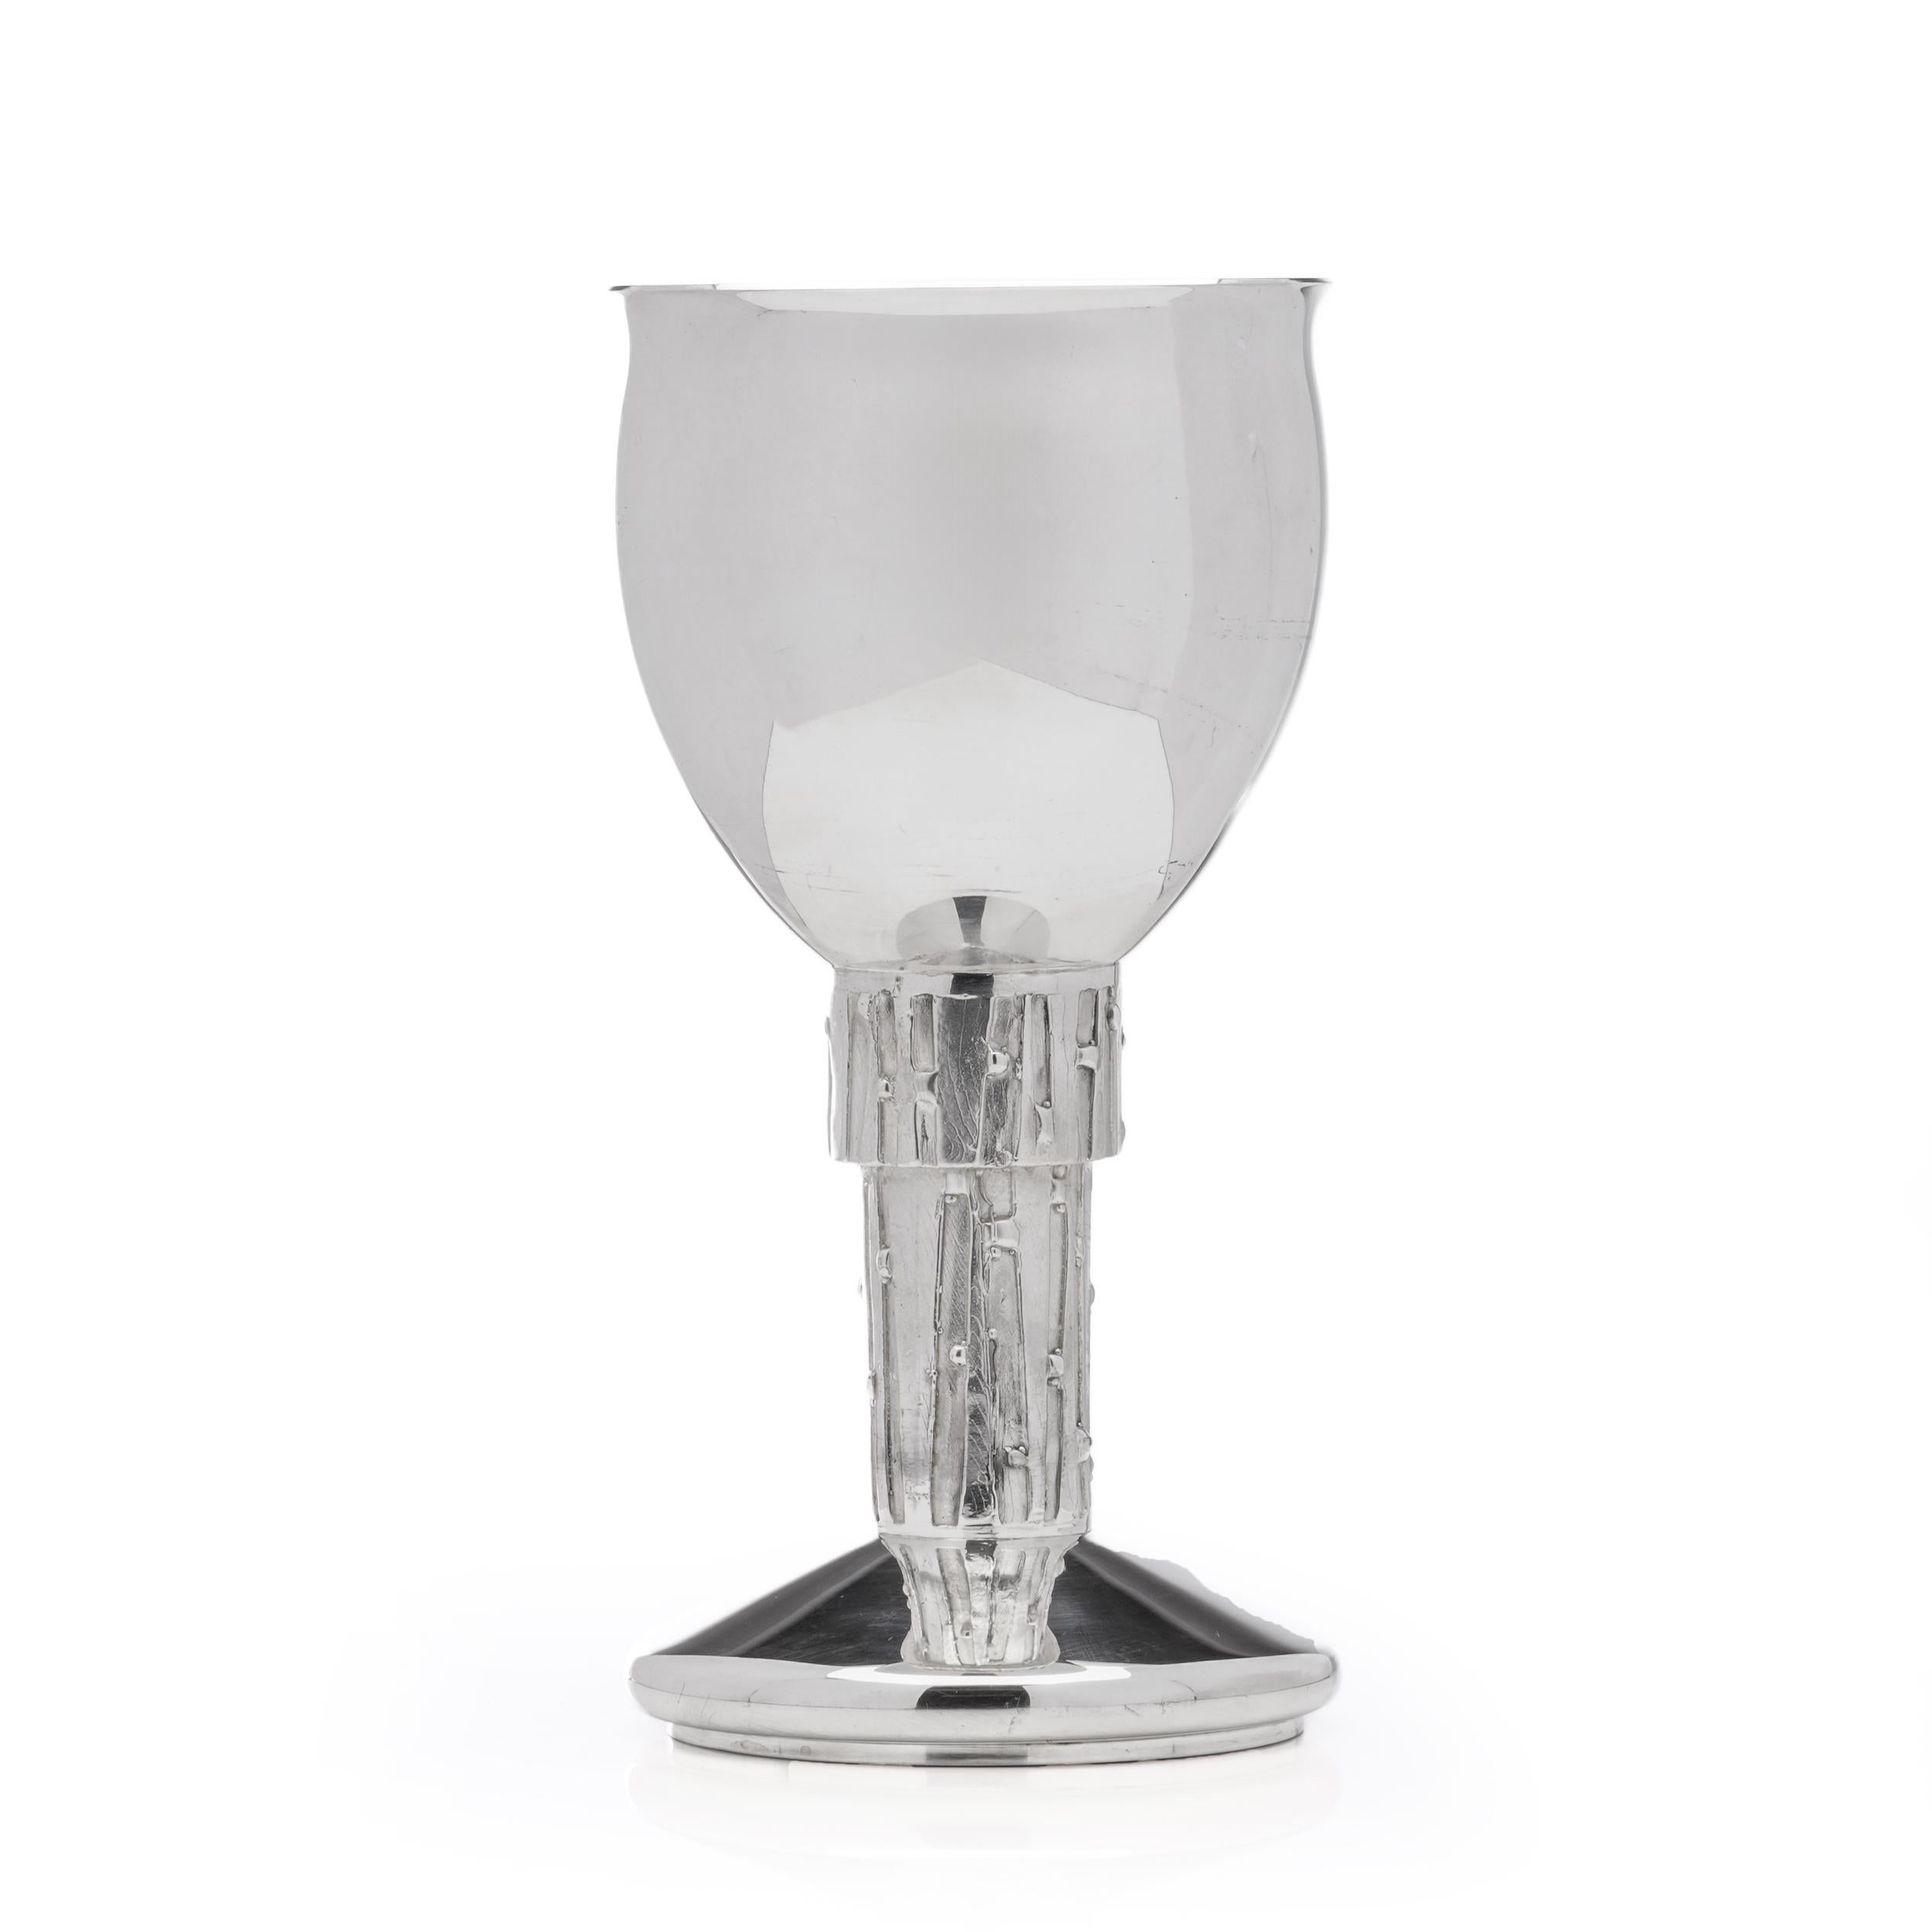 21st-century English Silversmith Brian Asquith 925 sterling silver goblet  For Sale 3